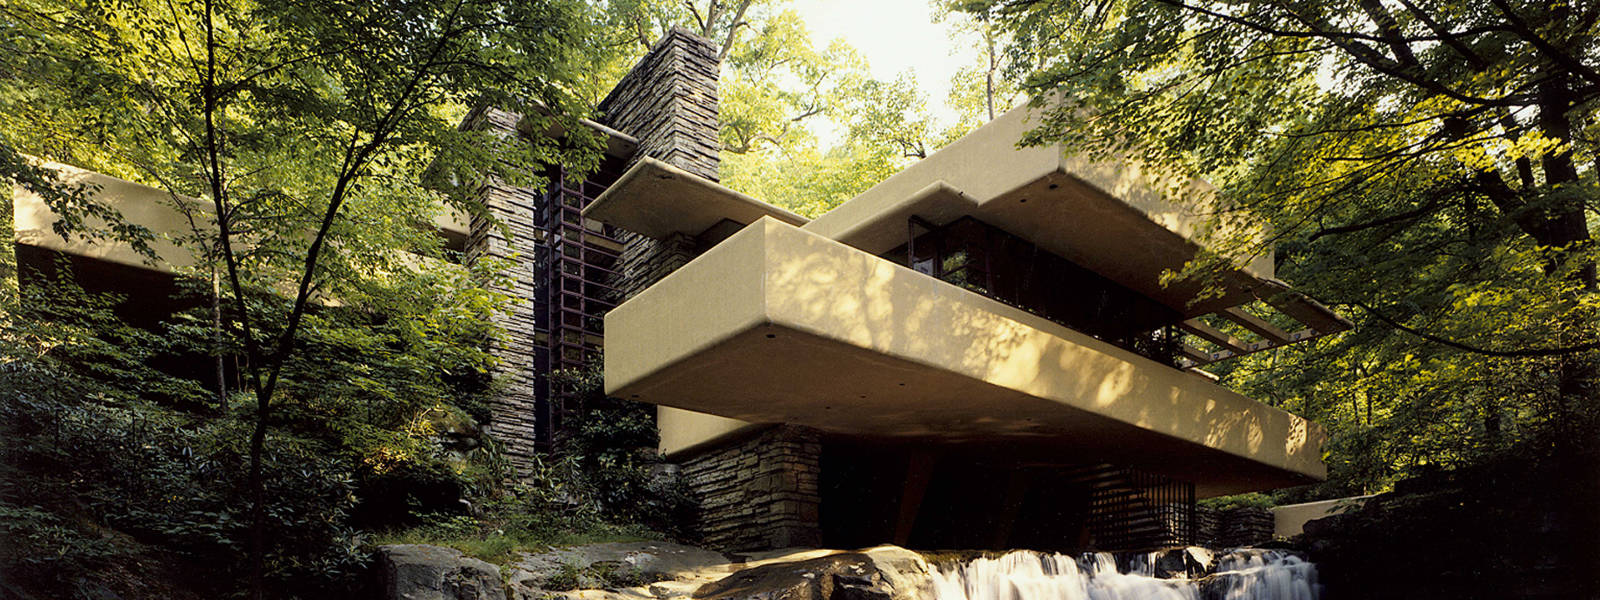 Why Give to Fallingwater?